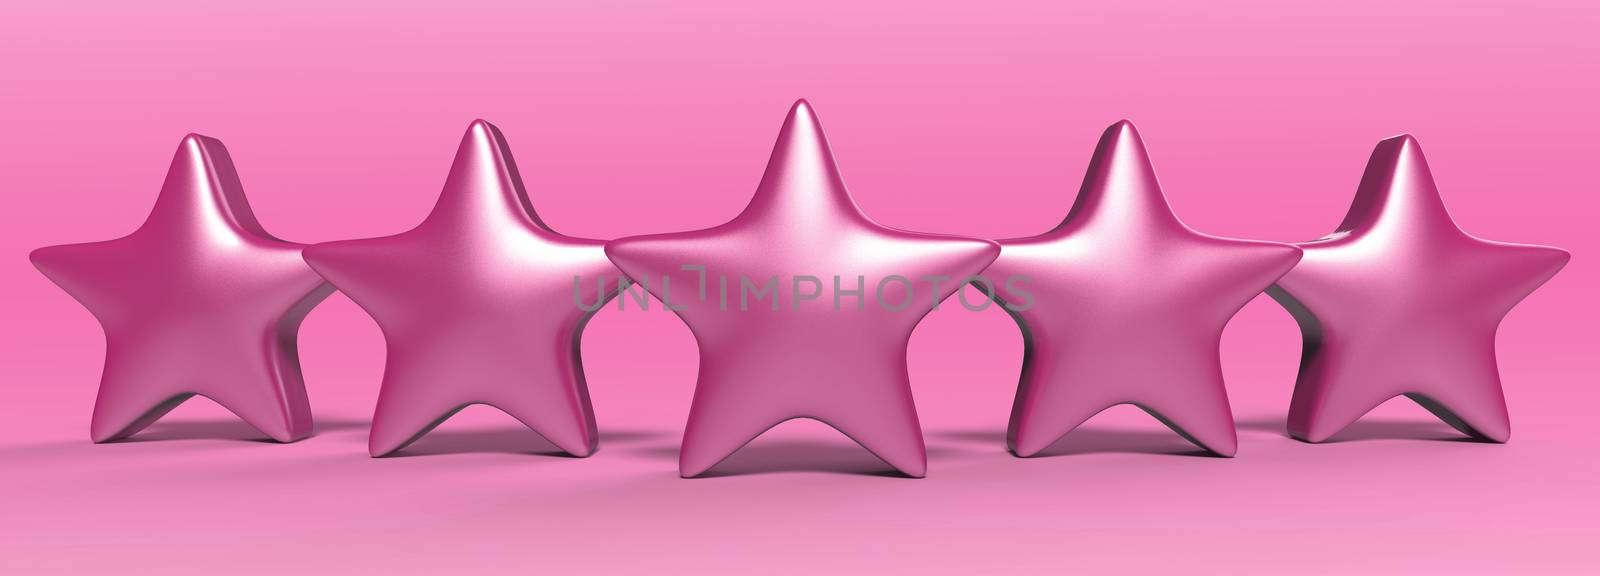 3d five pink star on color background. Render and illustration of golden star for premium review by Andreajk3